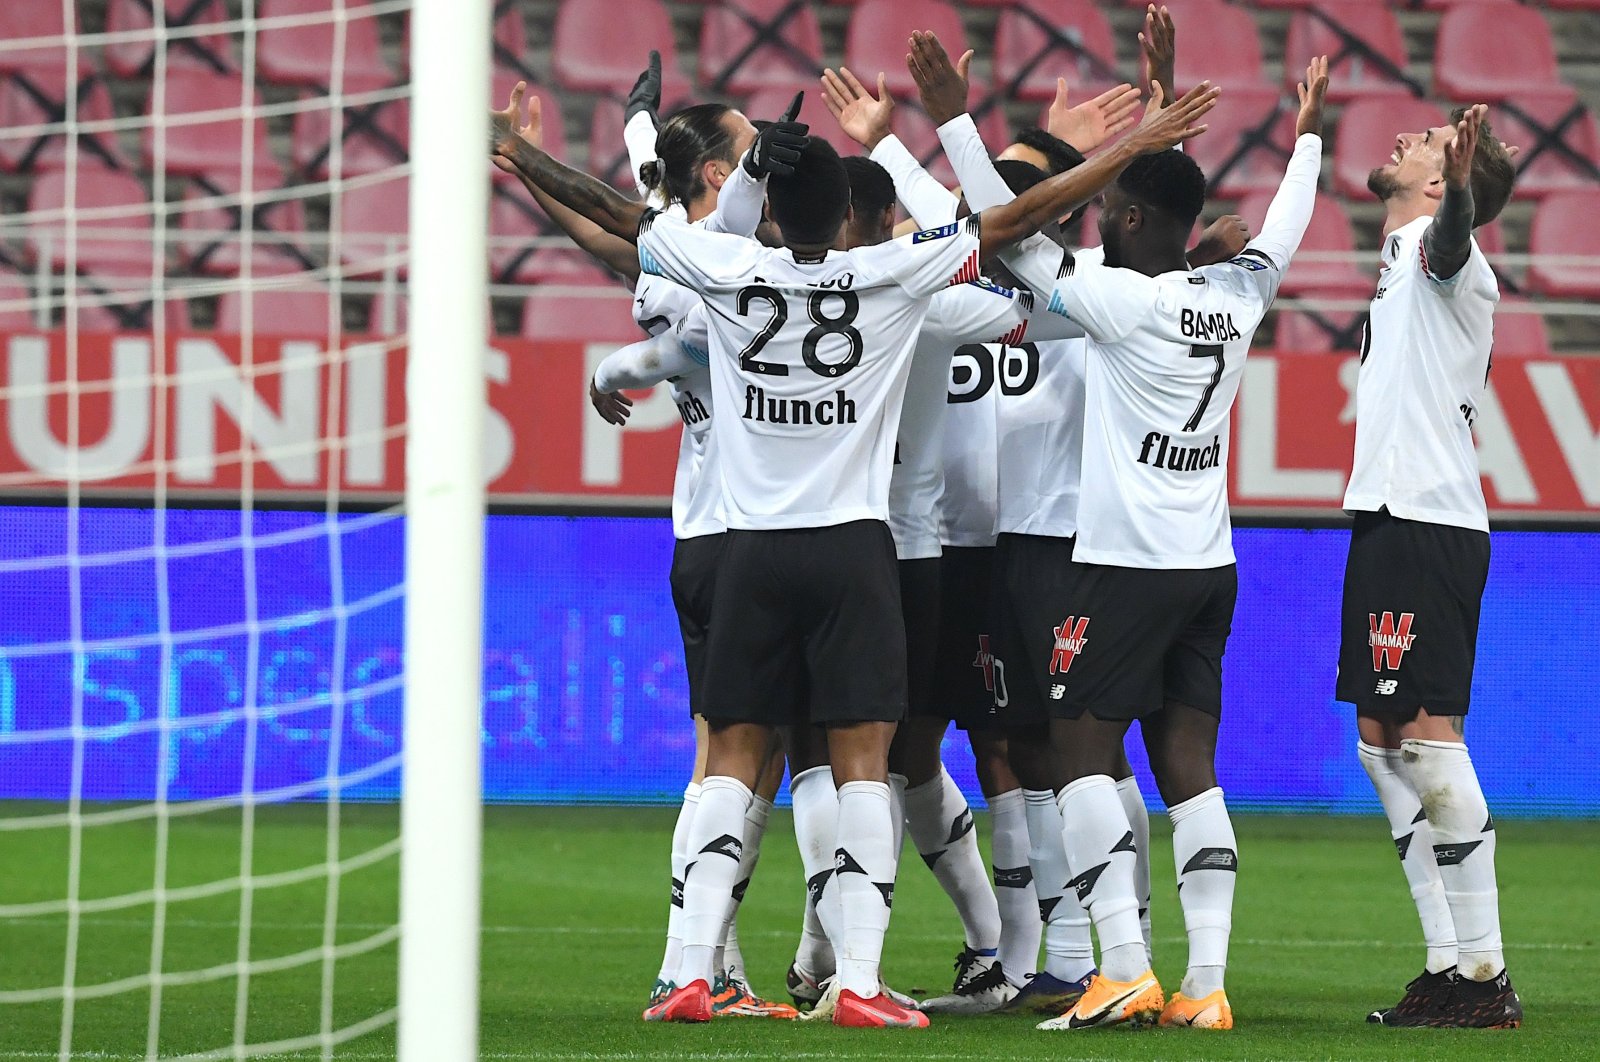 Lille’s players celebrate after Turkish forward Yusuf Yazıcı scored a goal during the French Ligue 1 football match against Dijon at the Gaston Gerard Stadium in Dijon, central France, Dec. 16, 2020. (AFP Photo)